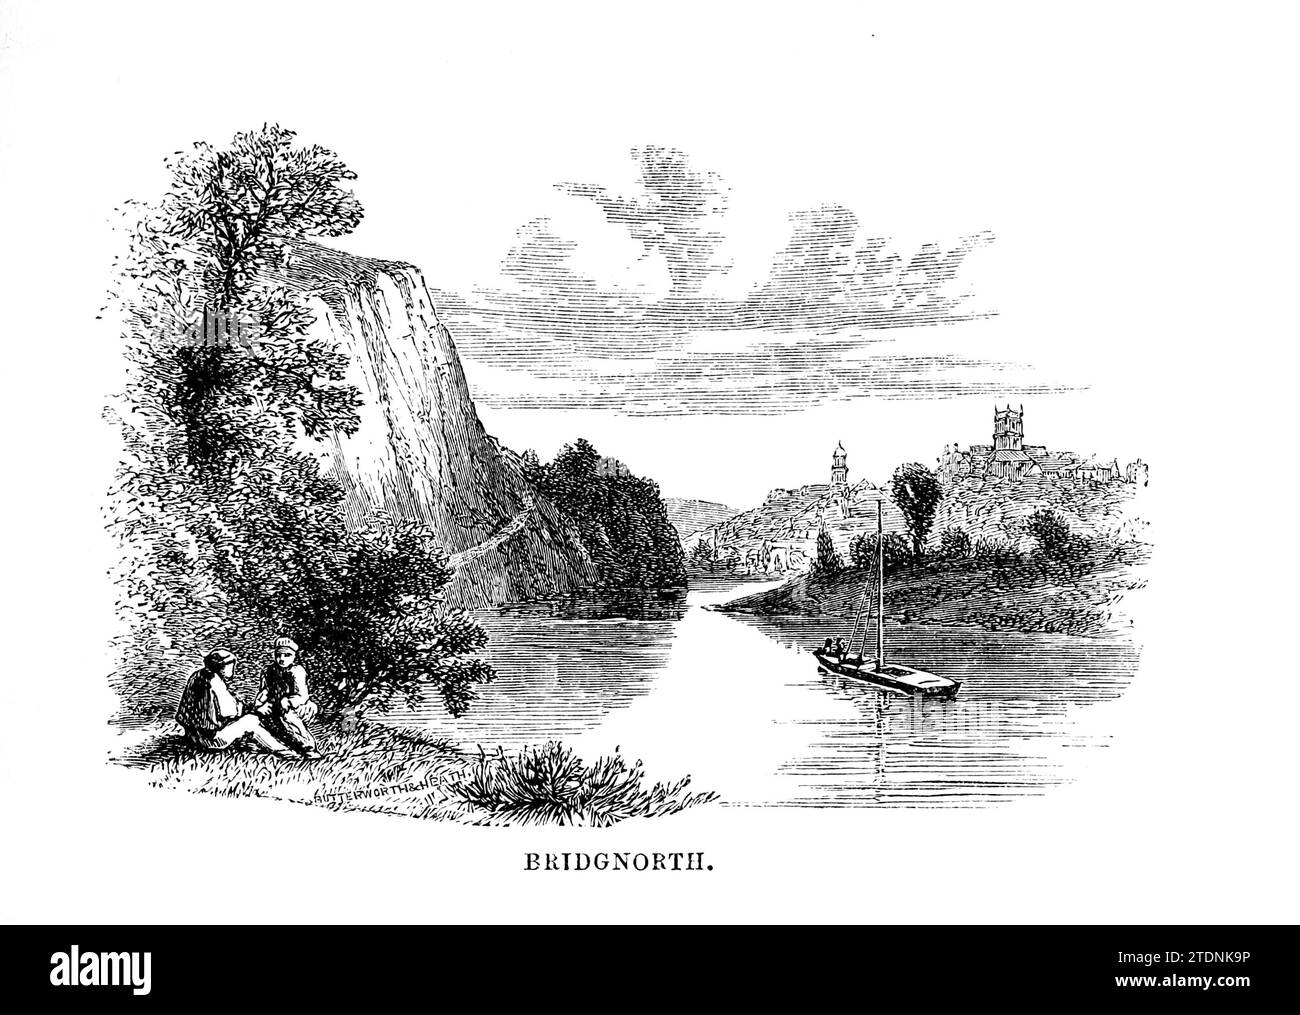 Bridgnorth is a town and civil parish in Shropshire, England. from the book The Severn valley: a series of sketches, descriptive and pictorial, of the course of the Severn: containing notices of its topographical, industrial, and geological features; with glances at its historical and legendary associations by Randall, John, 1810-1910 Publication date 1862 Publisher J. S. Virtue Stock Photo